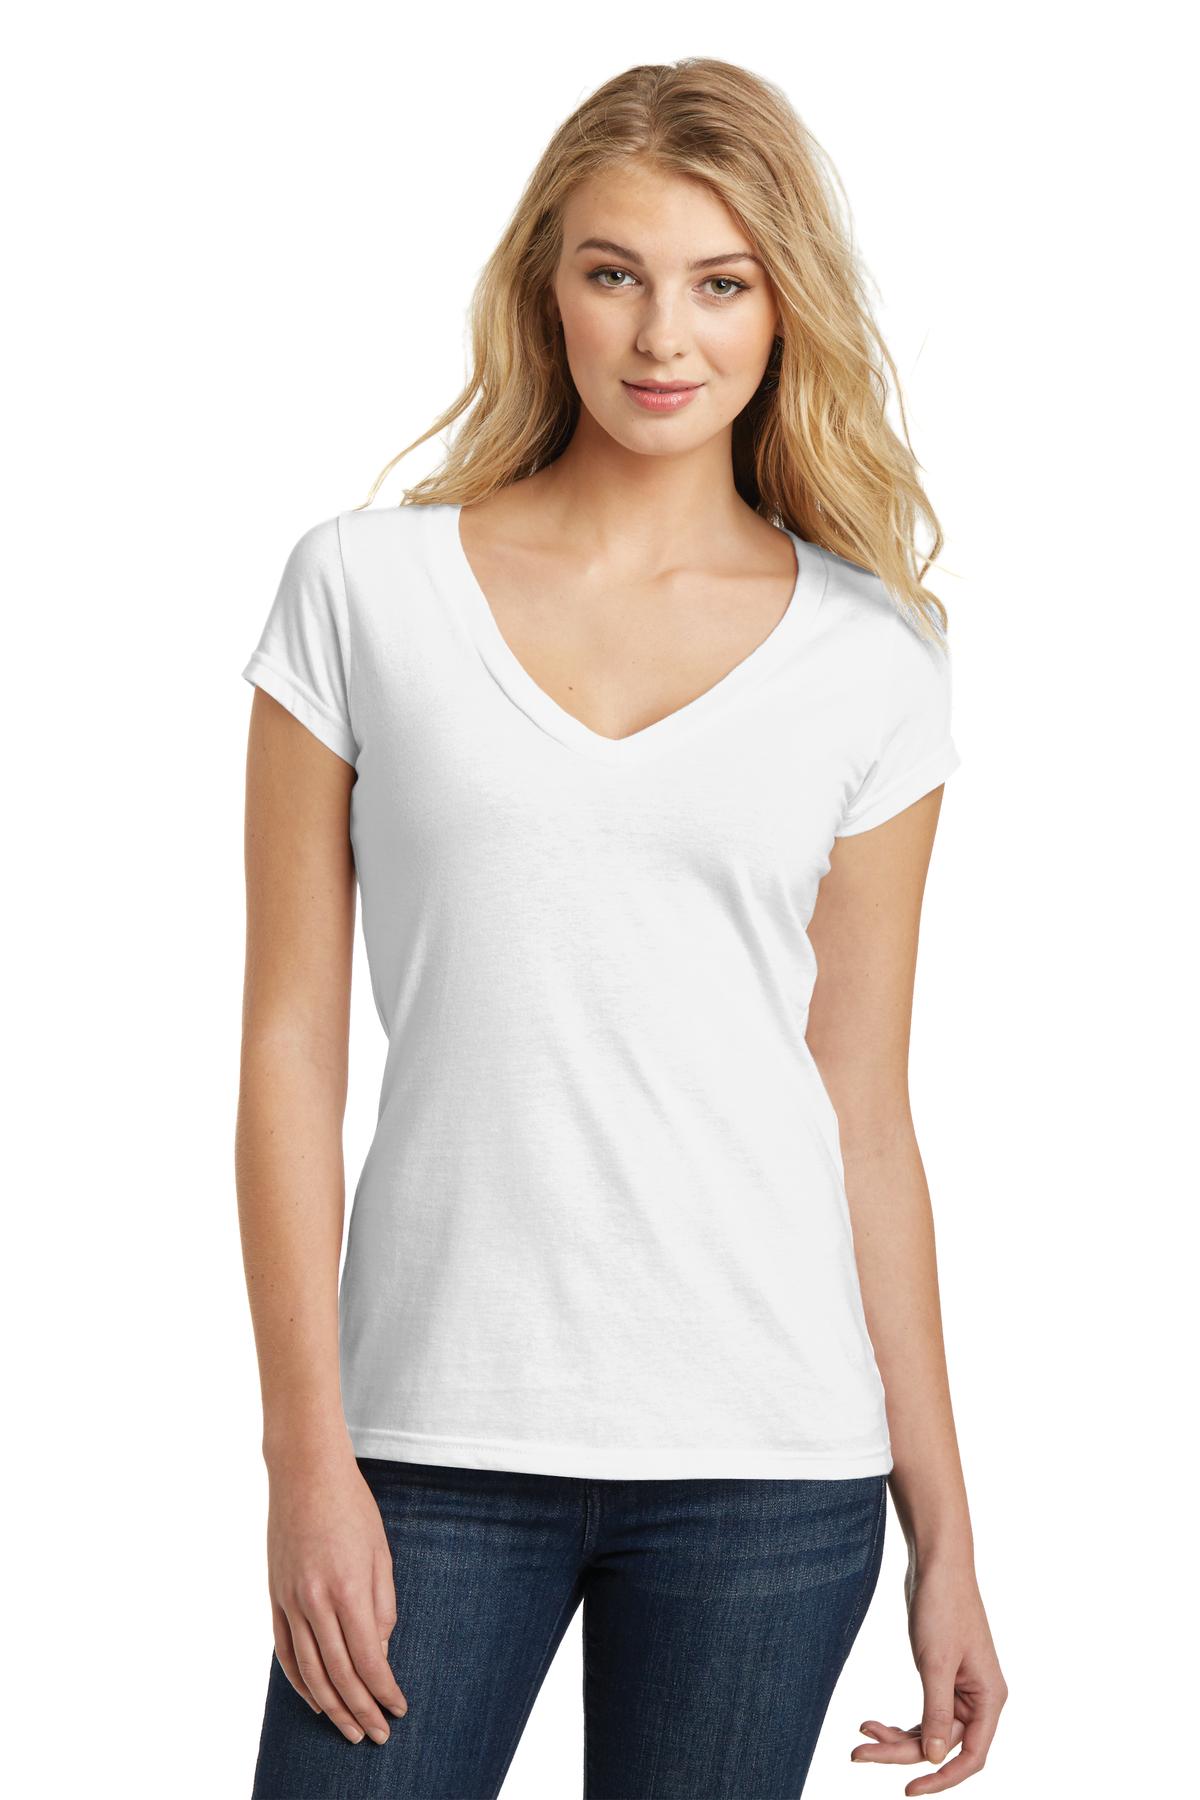 District  DT6502 - Juniors Very Important Tee  Deep V-Neck